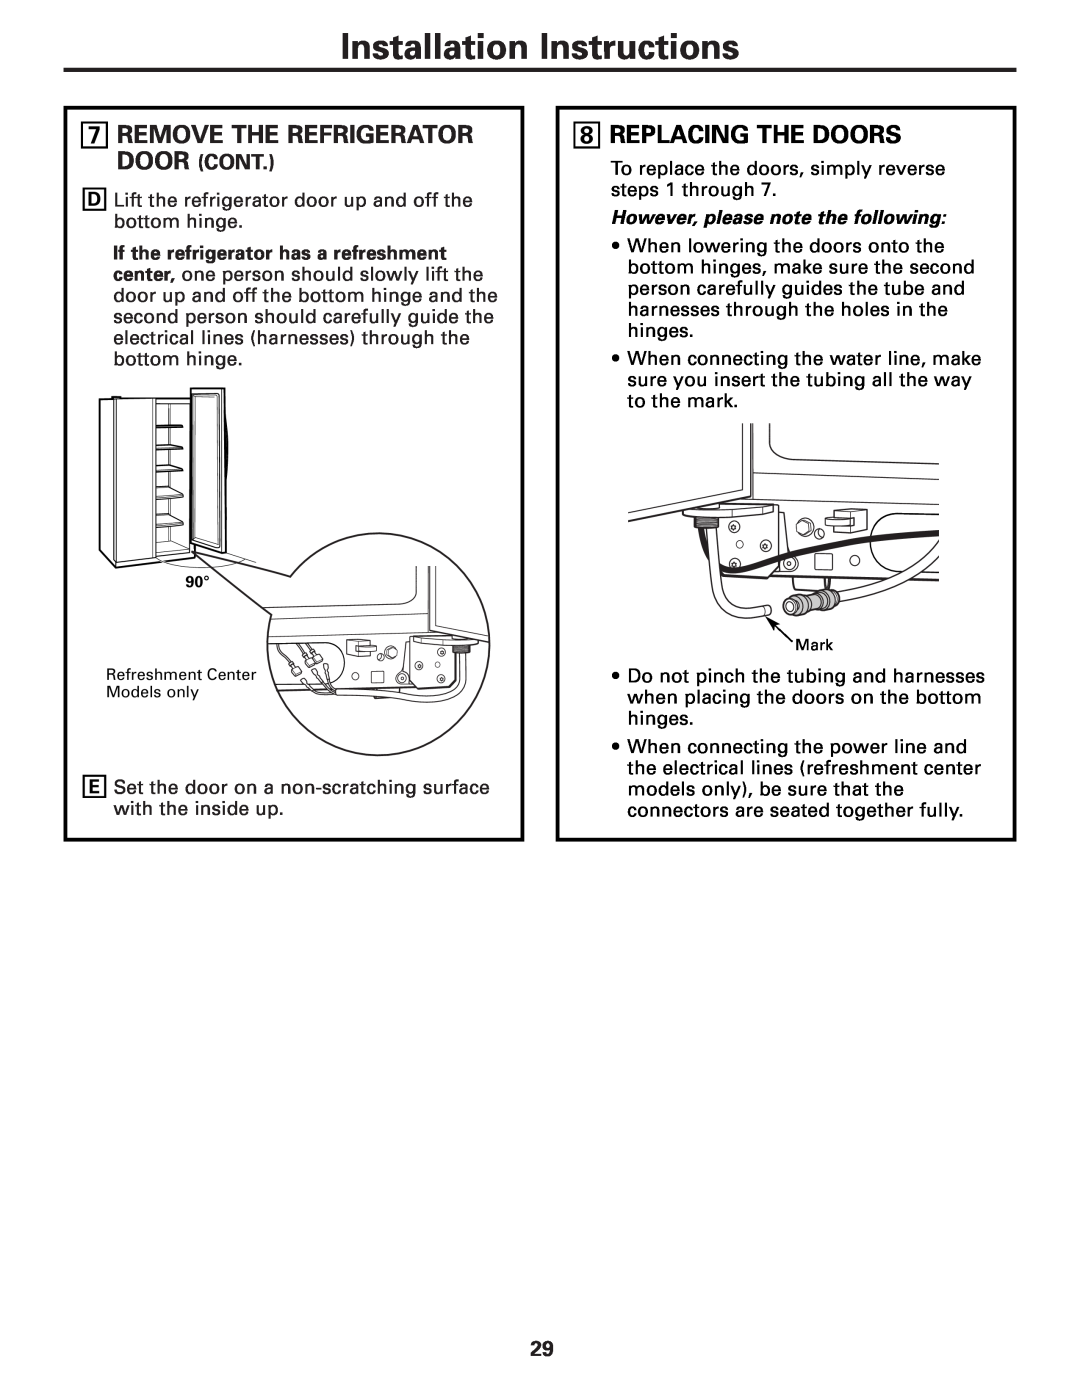 Hotpoint 23 operating instructions Replacing The Doors, Installation Instructions, Remove The Refrigerator Door Cont 